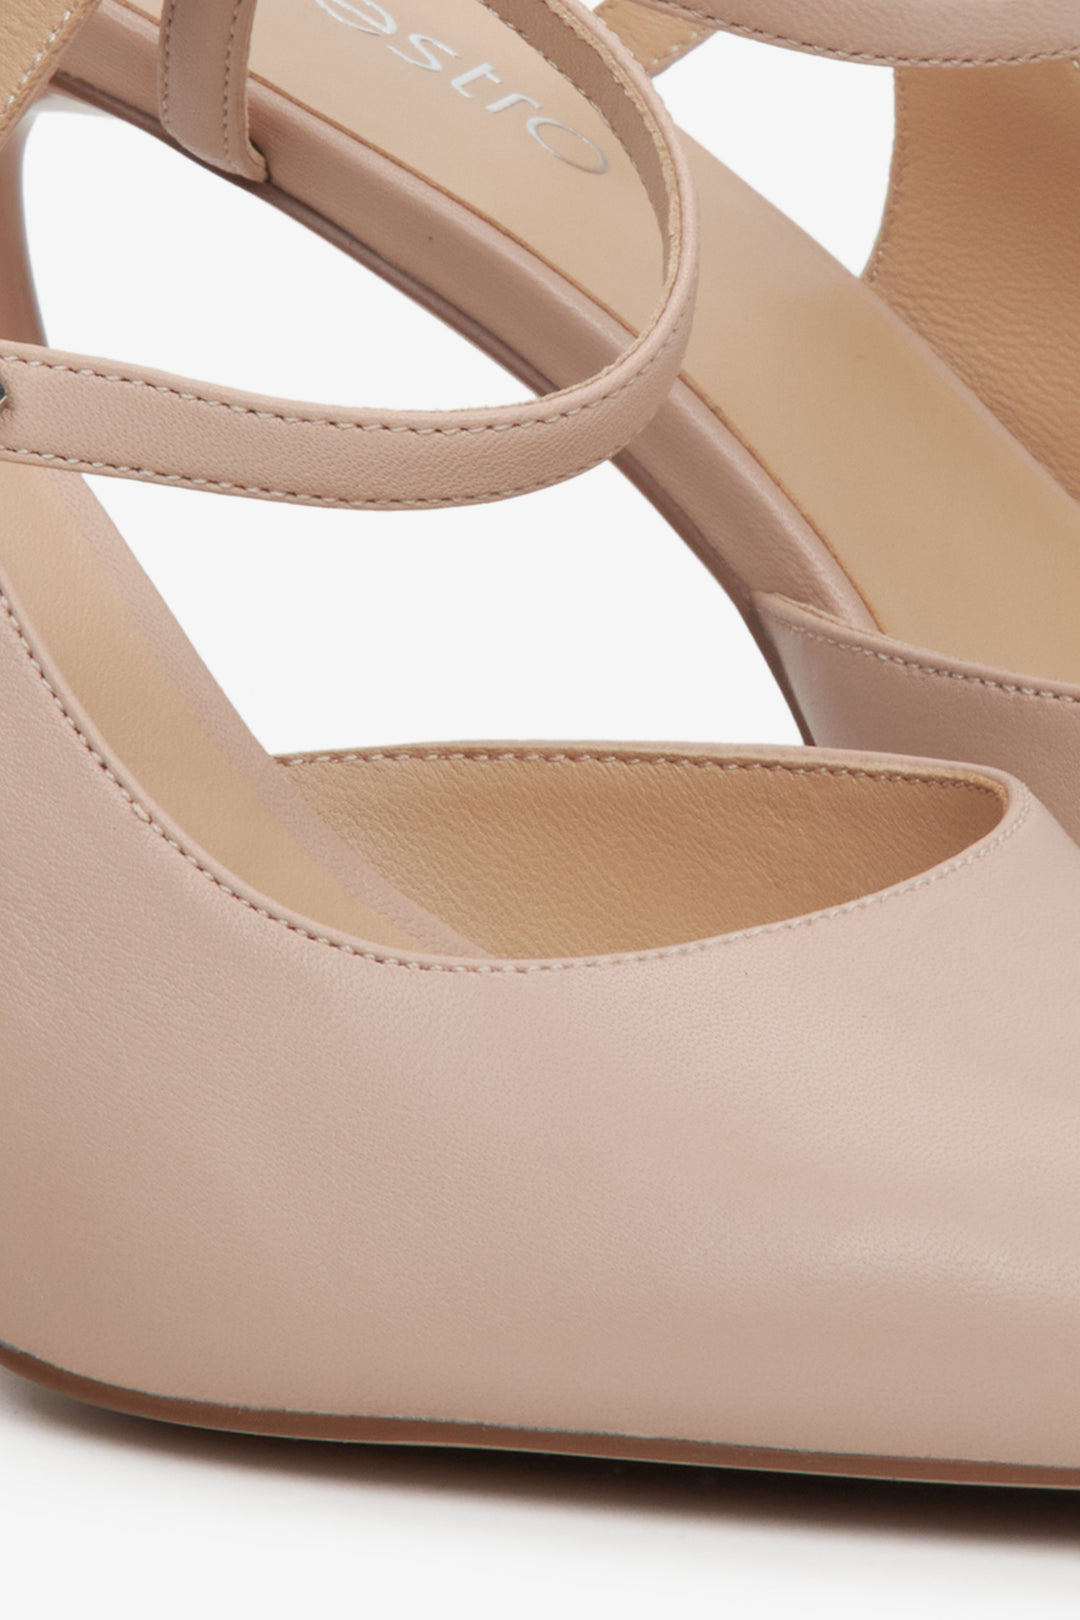 Women's beige slingback heels with a pointed toe - a close up on detaiks.